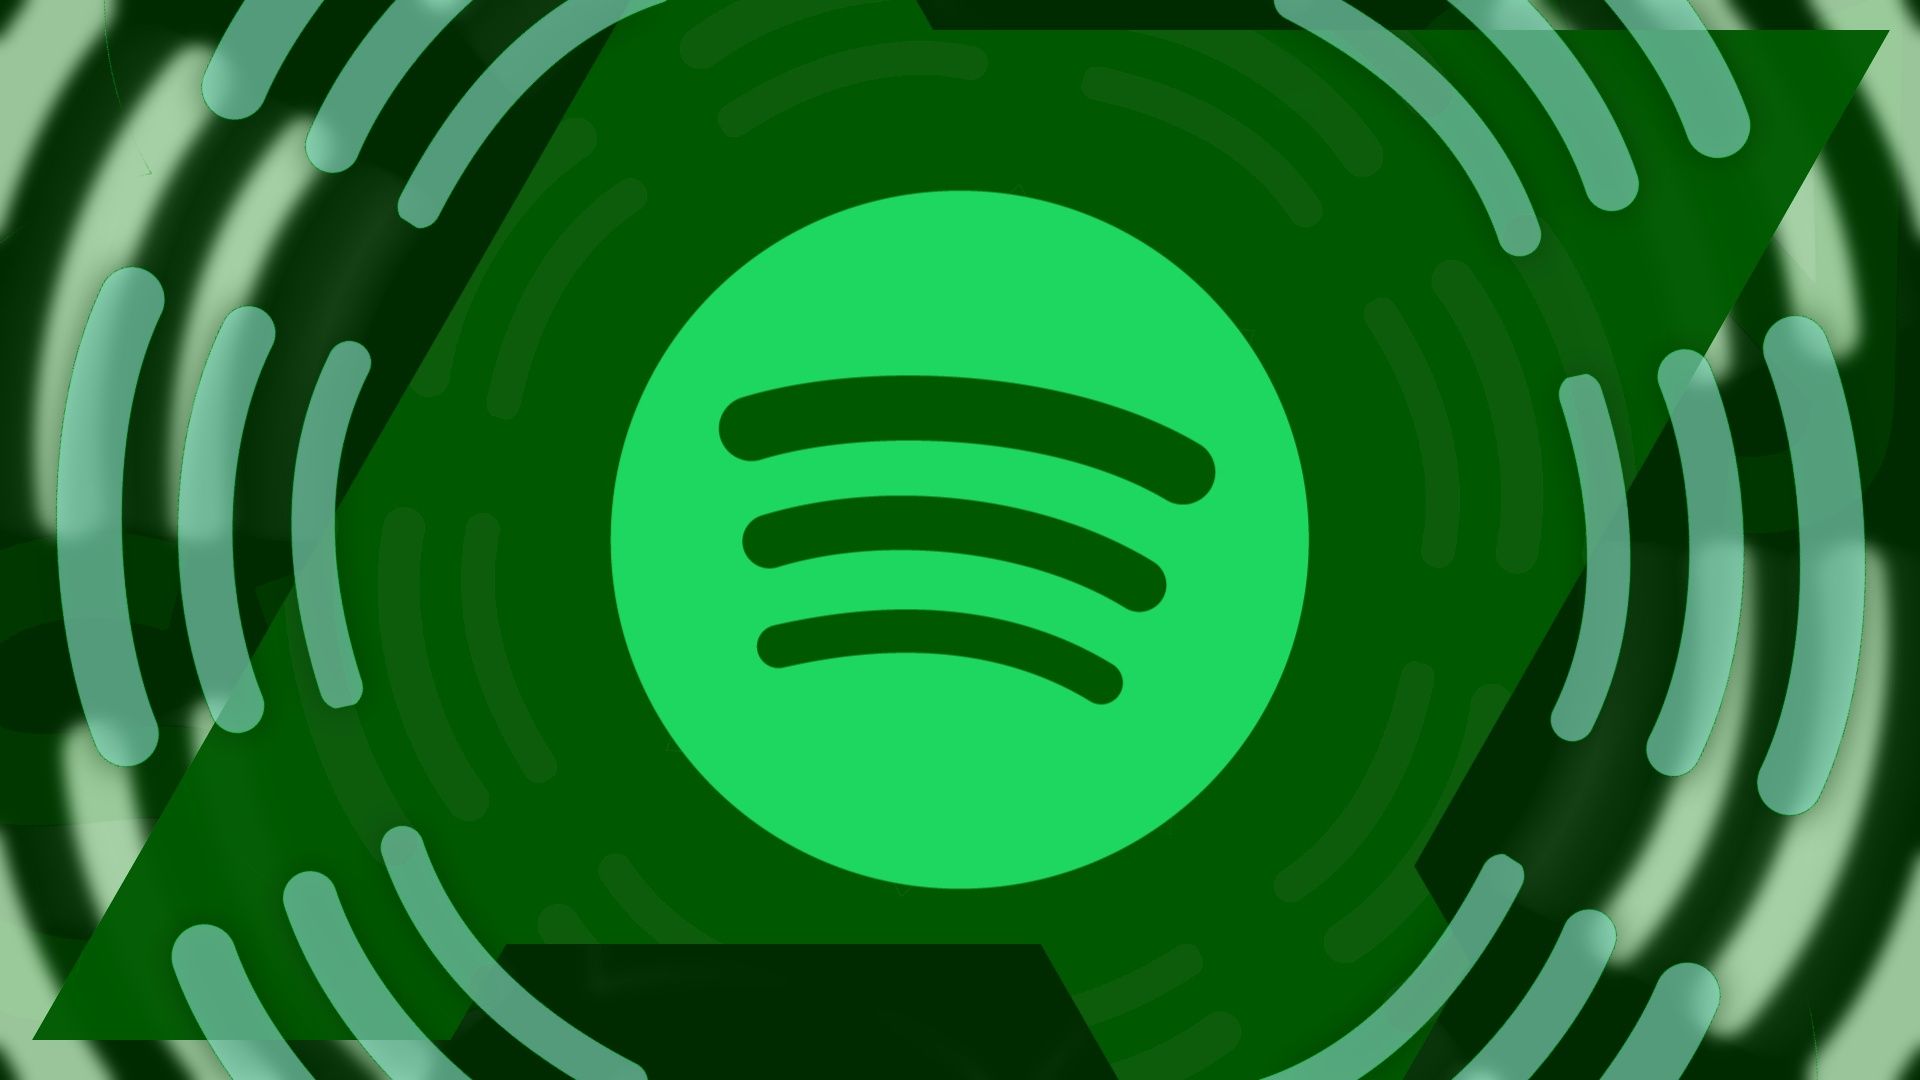 The Spotify logo in the initials AP